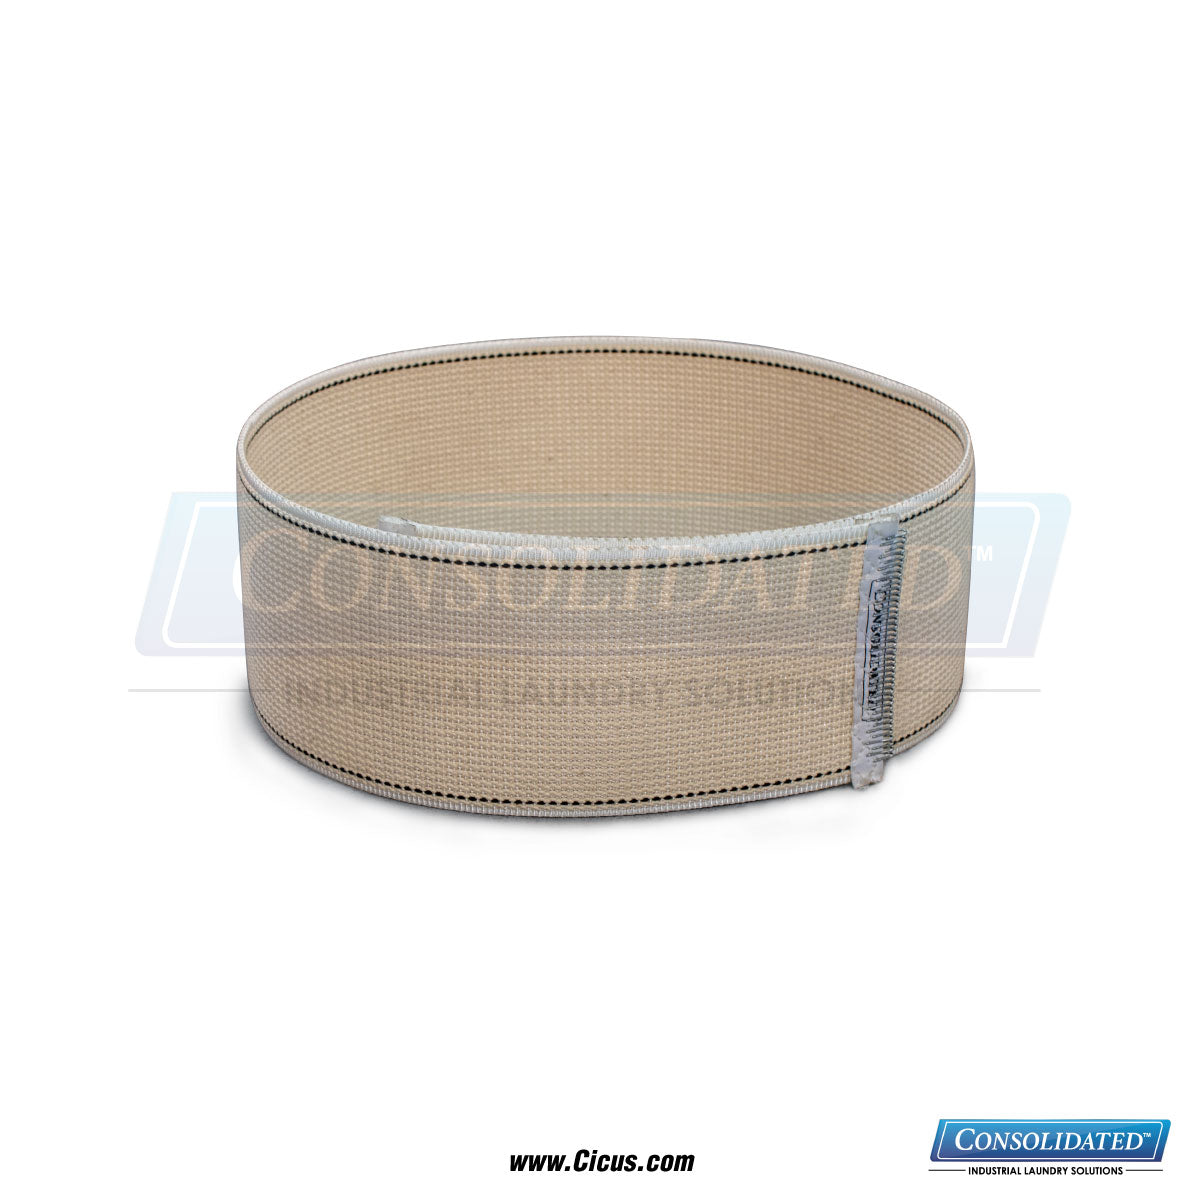 CIC Exclusive Chicago Dryer Canvas Ribbon - 1" x 94" (1001-294)